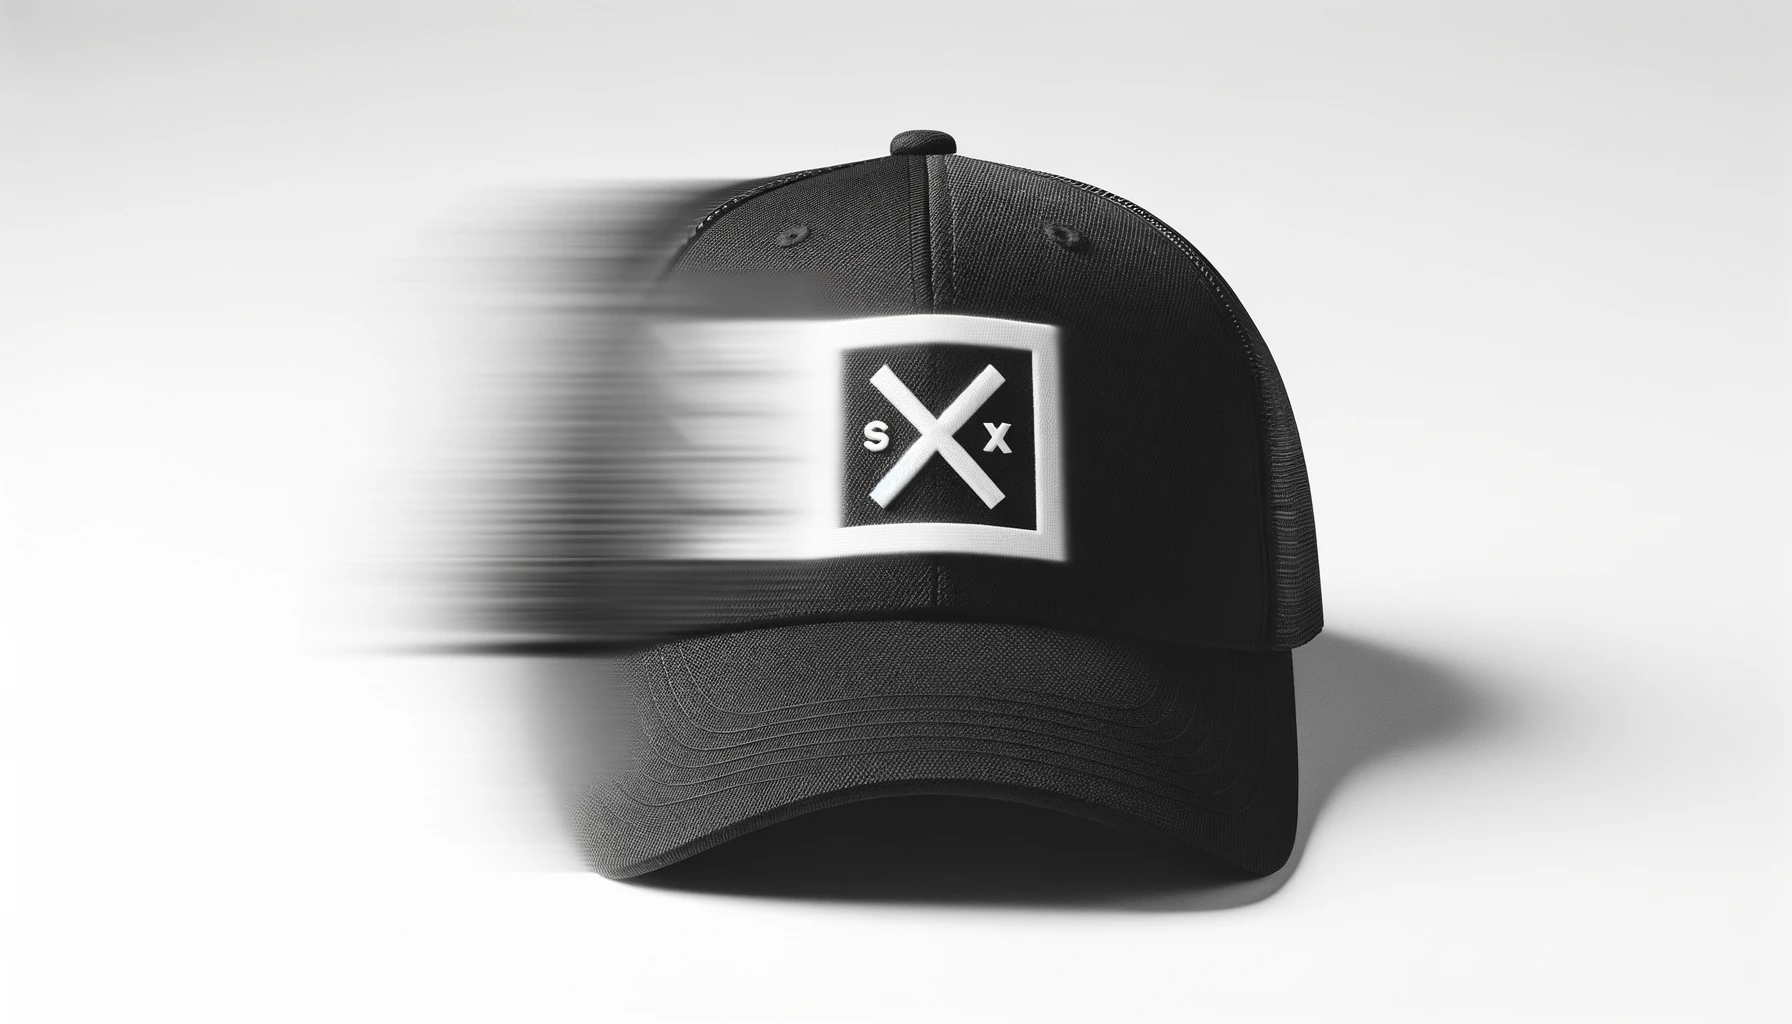 A cap with a large black and white logo in the center featuring 'SX' letters, focusing on its cool and stylish appearance. The logo is blurred, removed, or not visible from the angle. The image emphasizes the cap's sleek design and modern look.